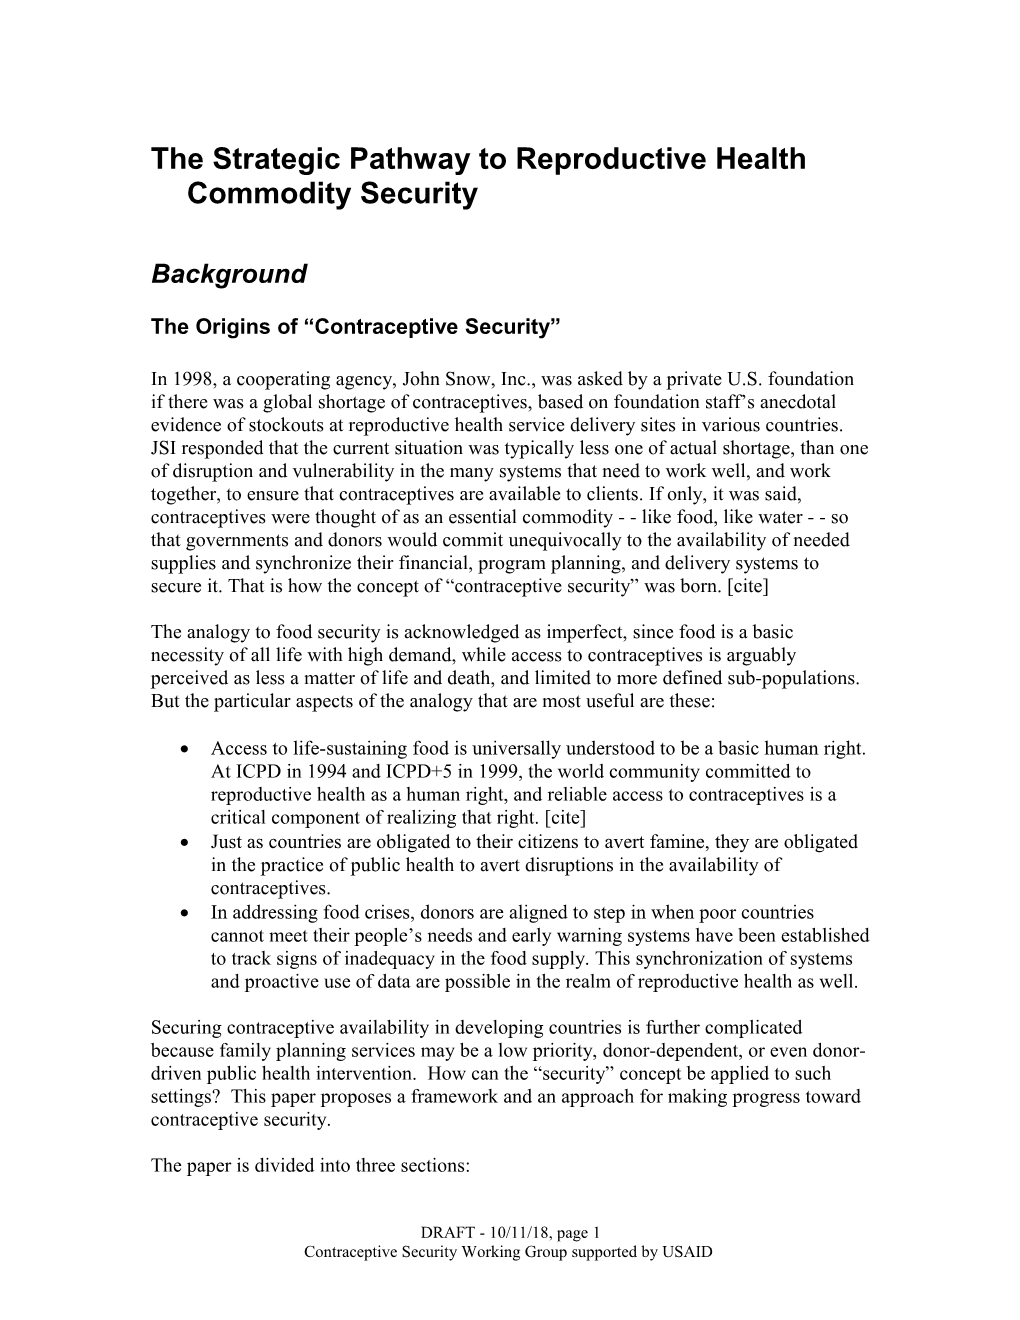 The Strategic Pathway to Reproductive Health Commodity Security